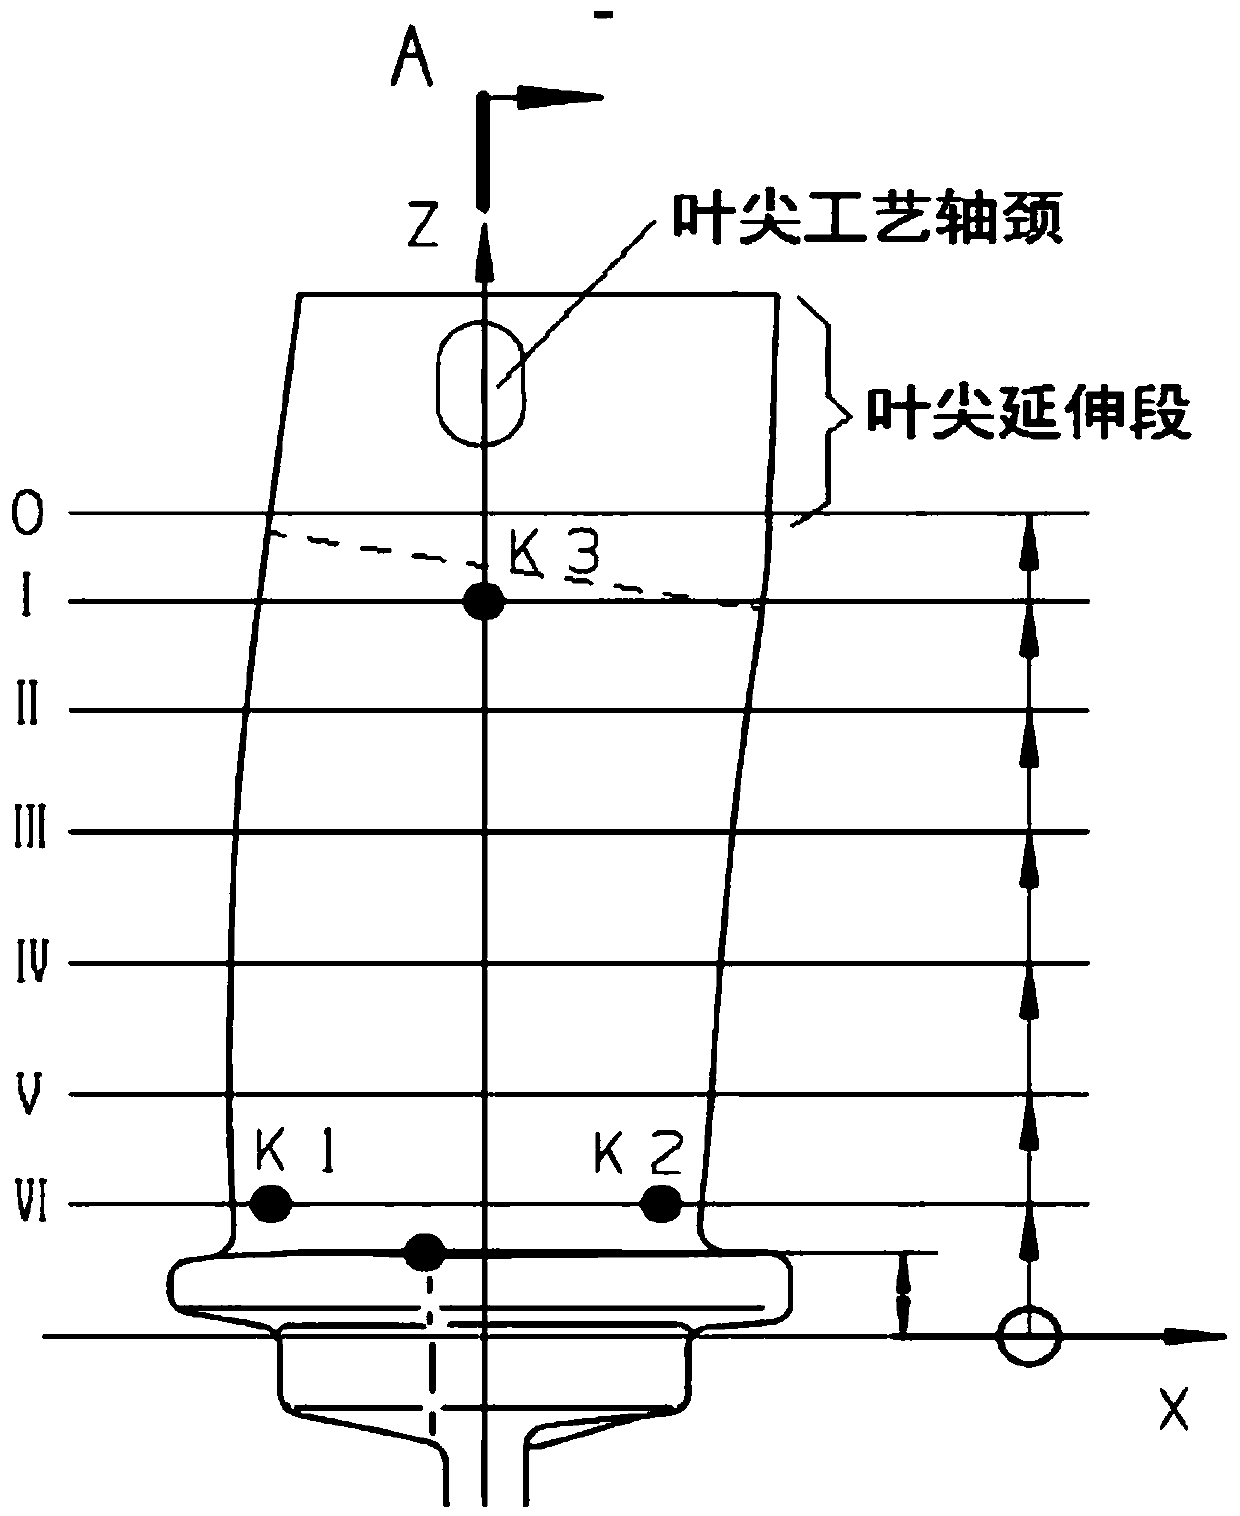 A modeling method for a blade tip process extension section of a rotor blade forge piece